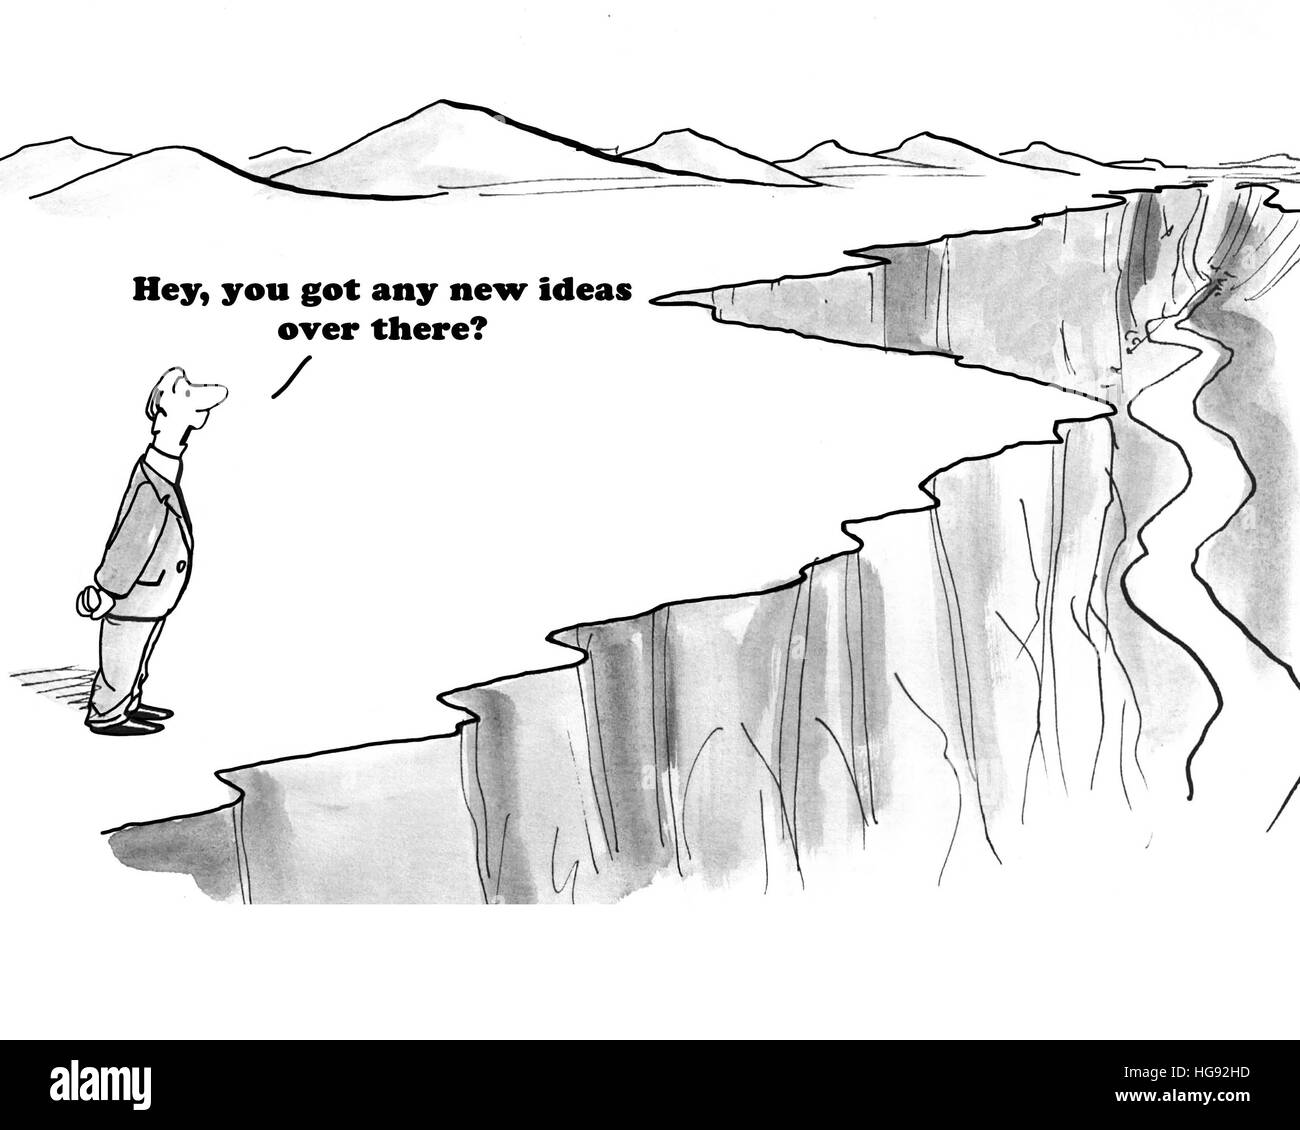 Business cartoon about searching everywhere for new ideas - even in a cliff gorge. Stock Photo